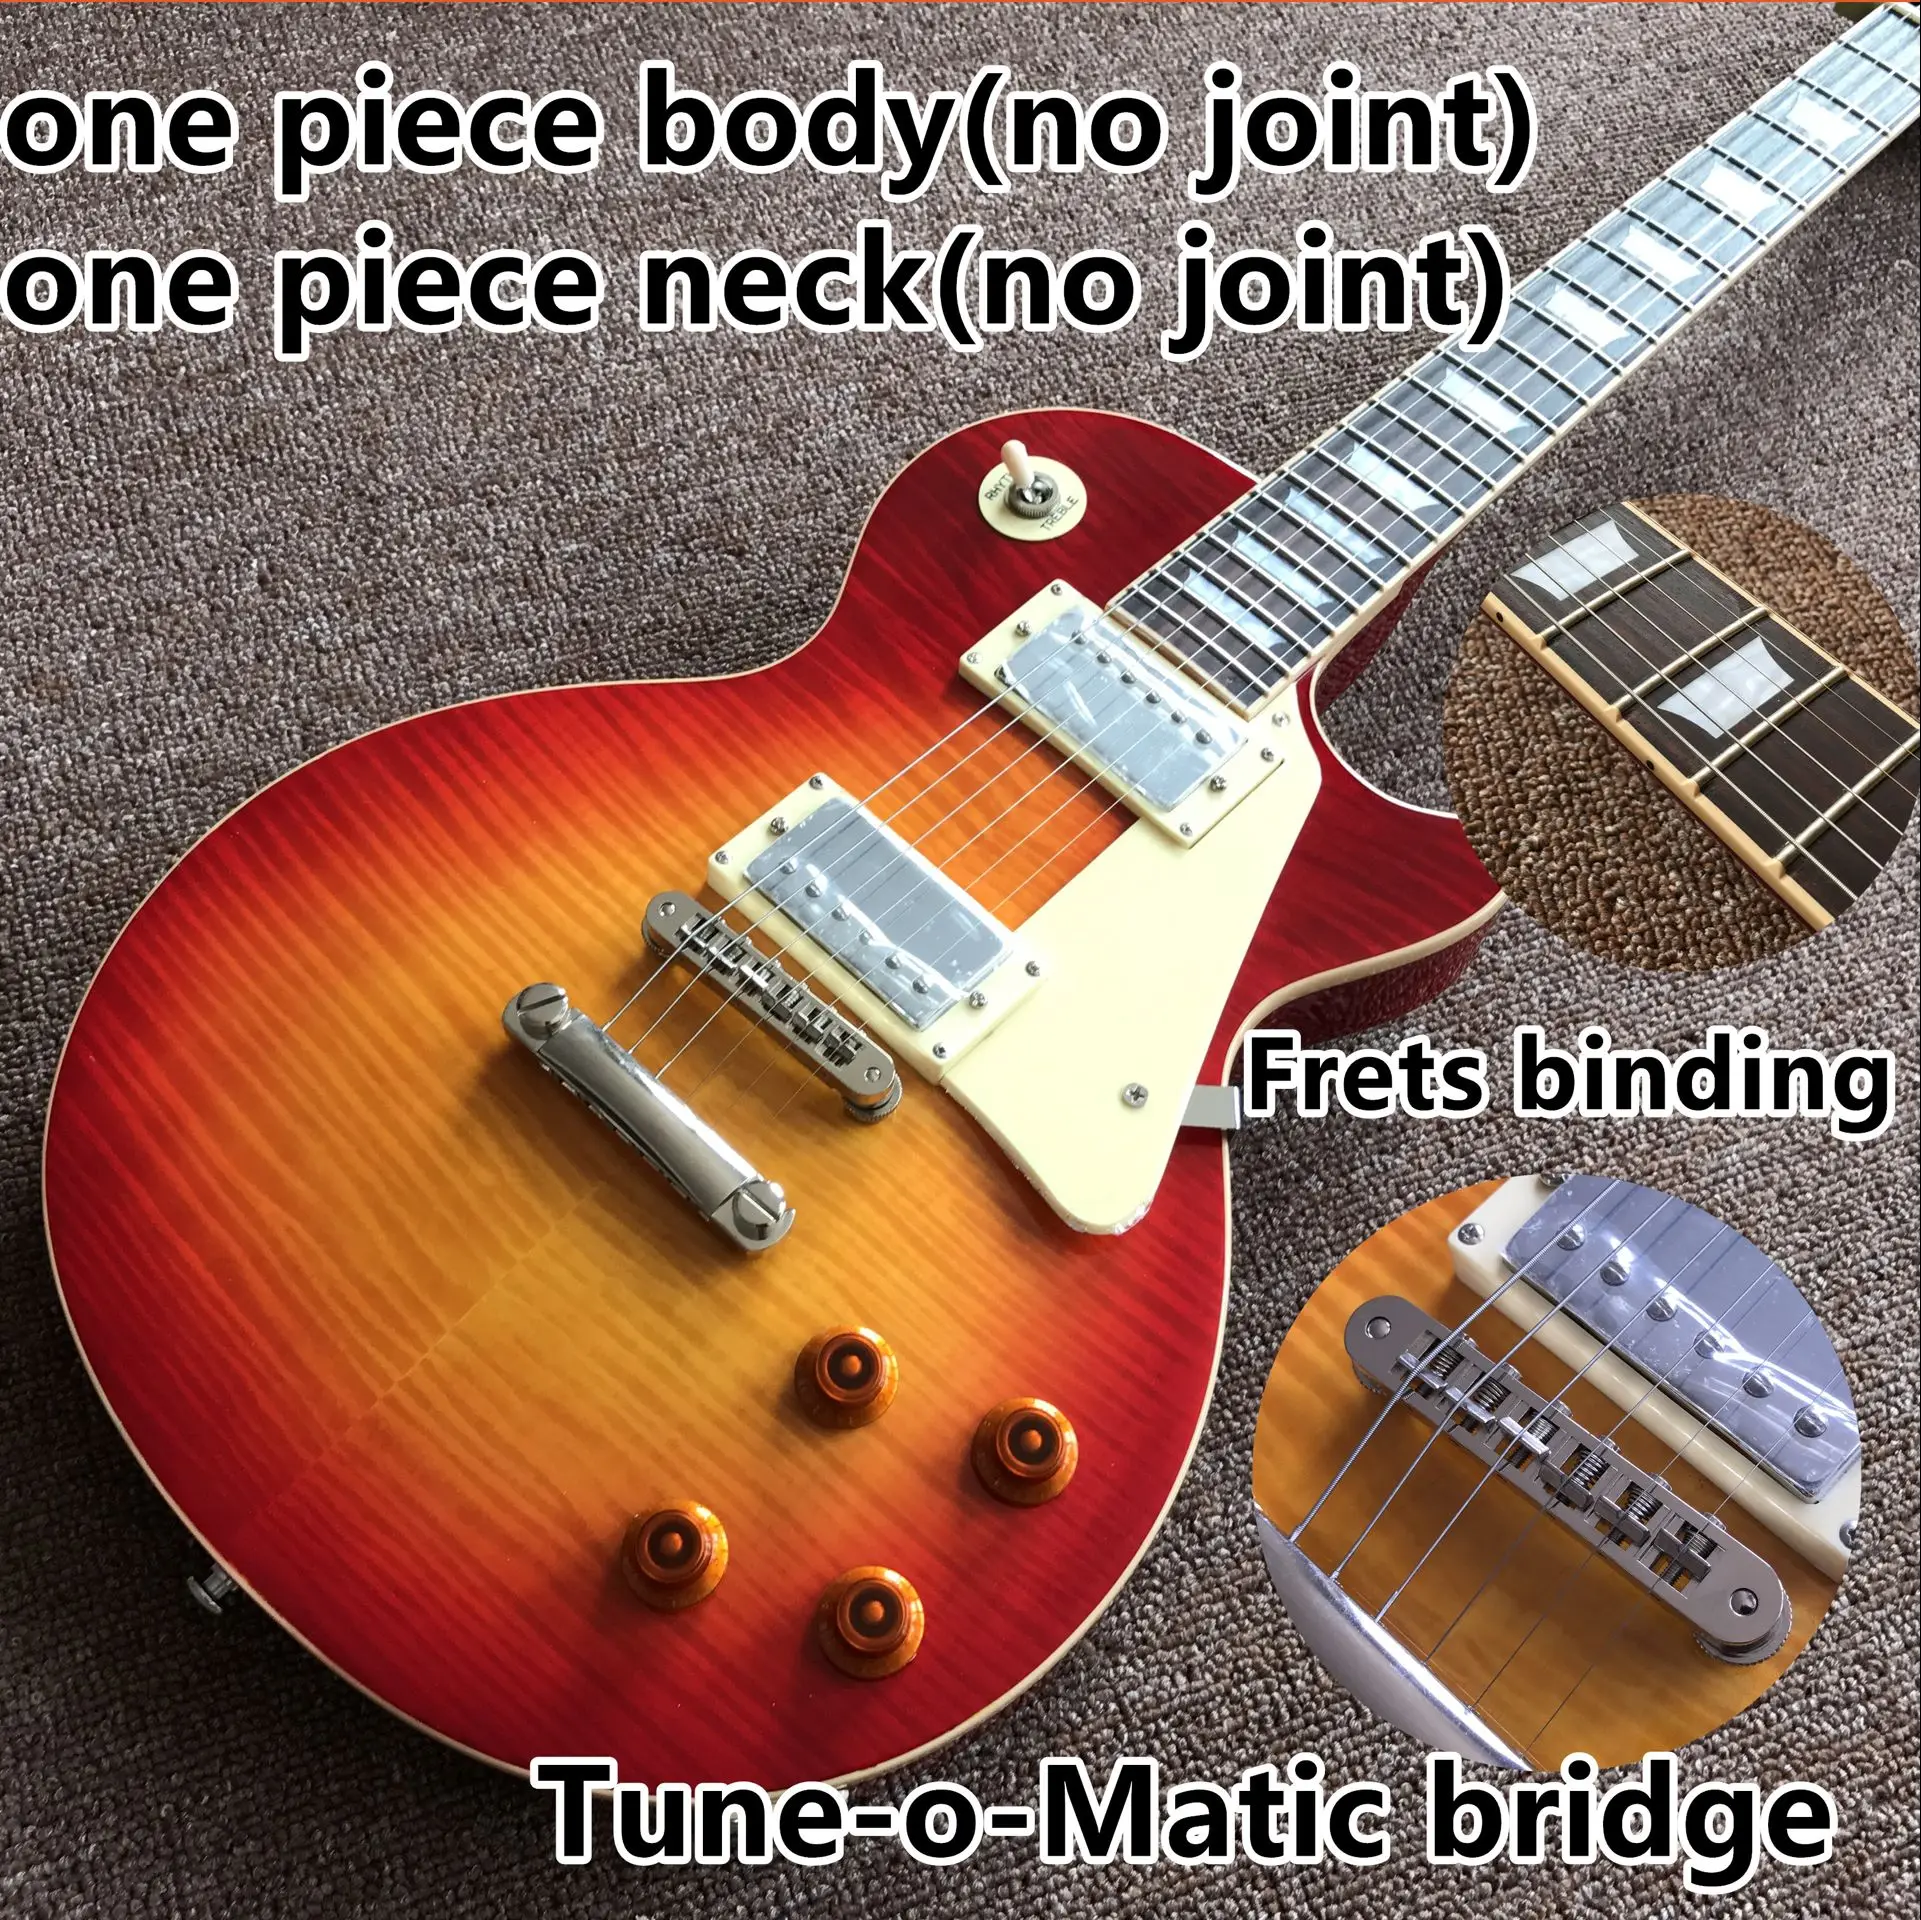 

Standard Electric Guitar 1959 R9 one piece neck one piece body honey color Tiger flame Tune-o-Matic bridge Frets binding.